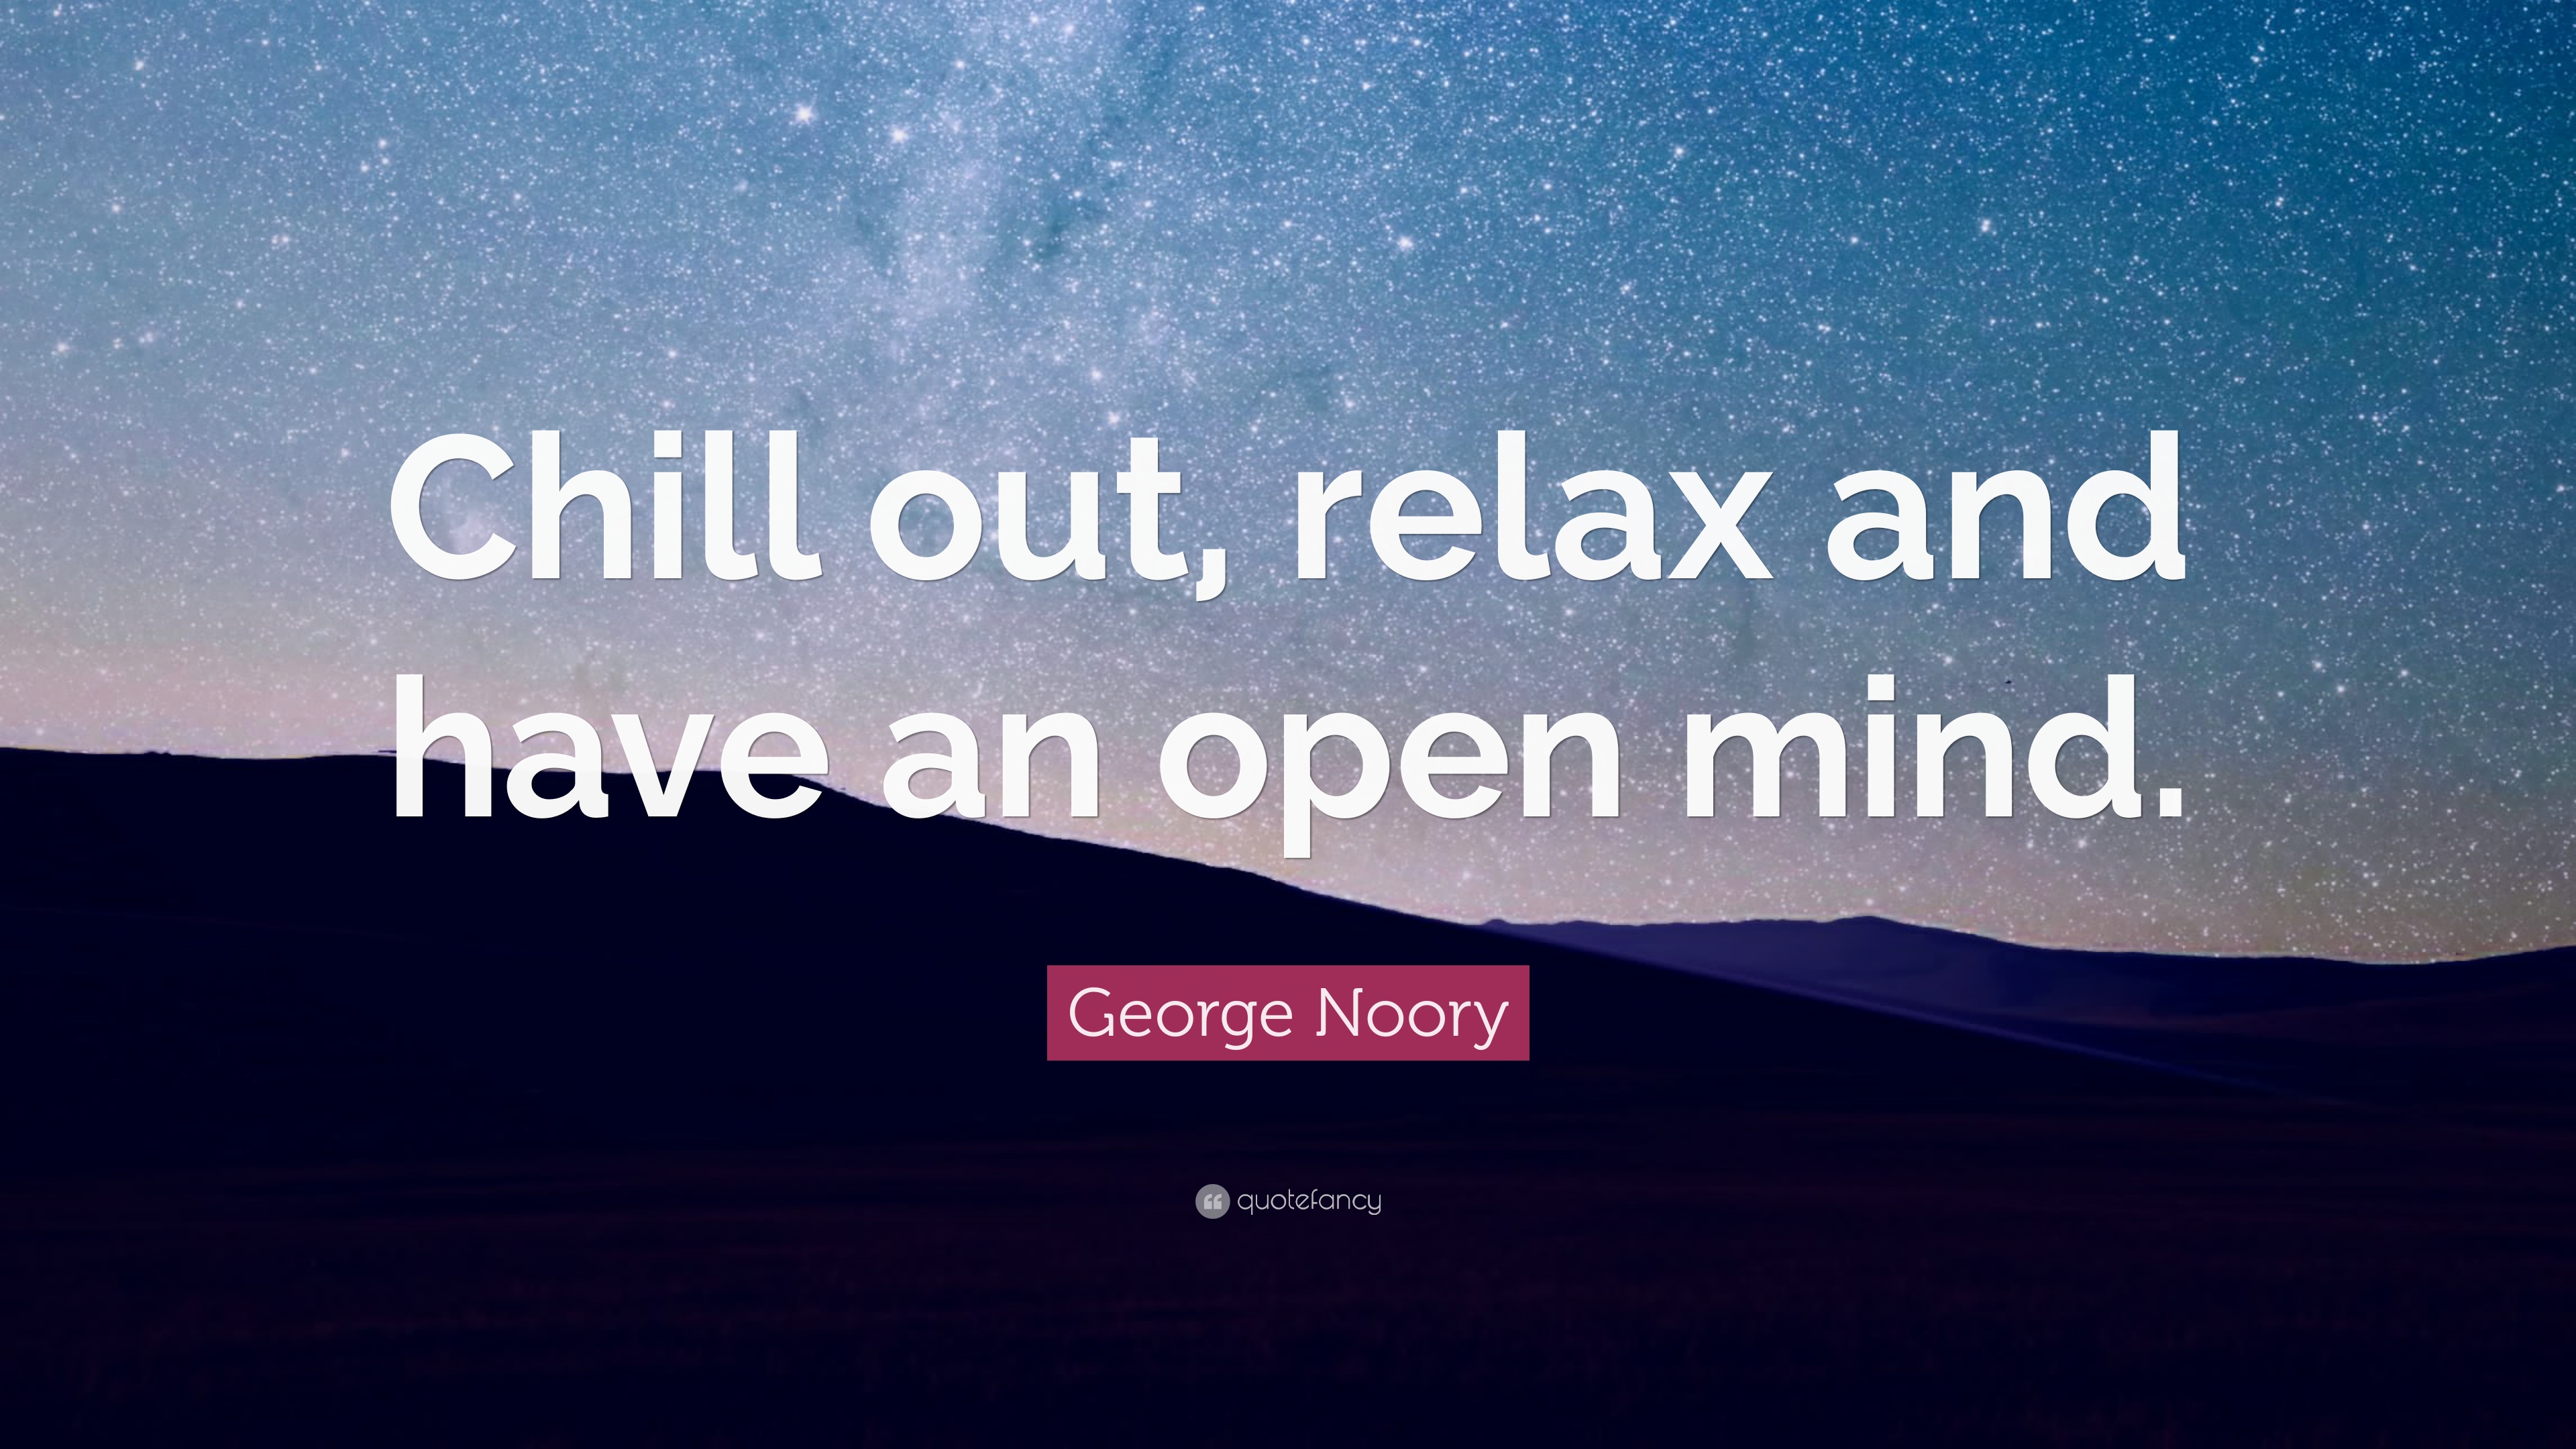 George Noory Quote: “Chill out, relax and have an open mind